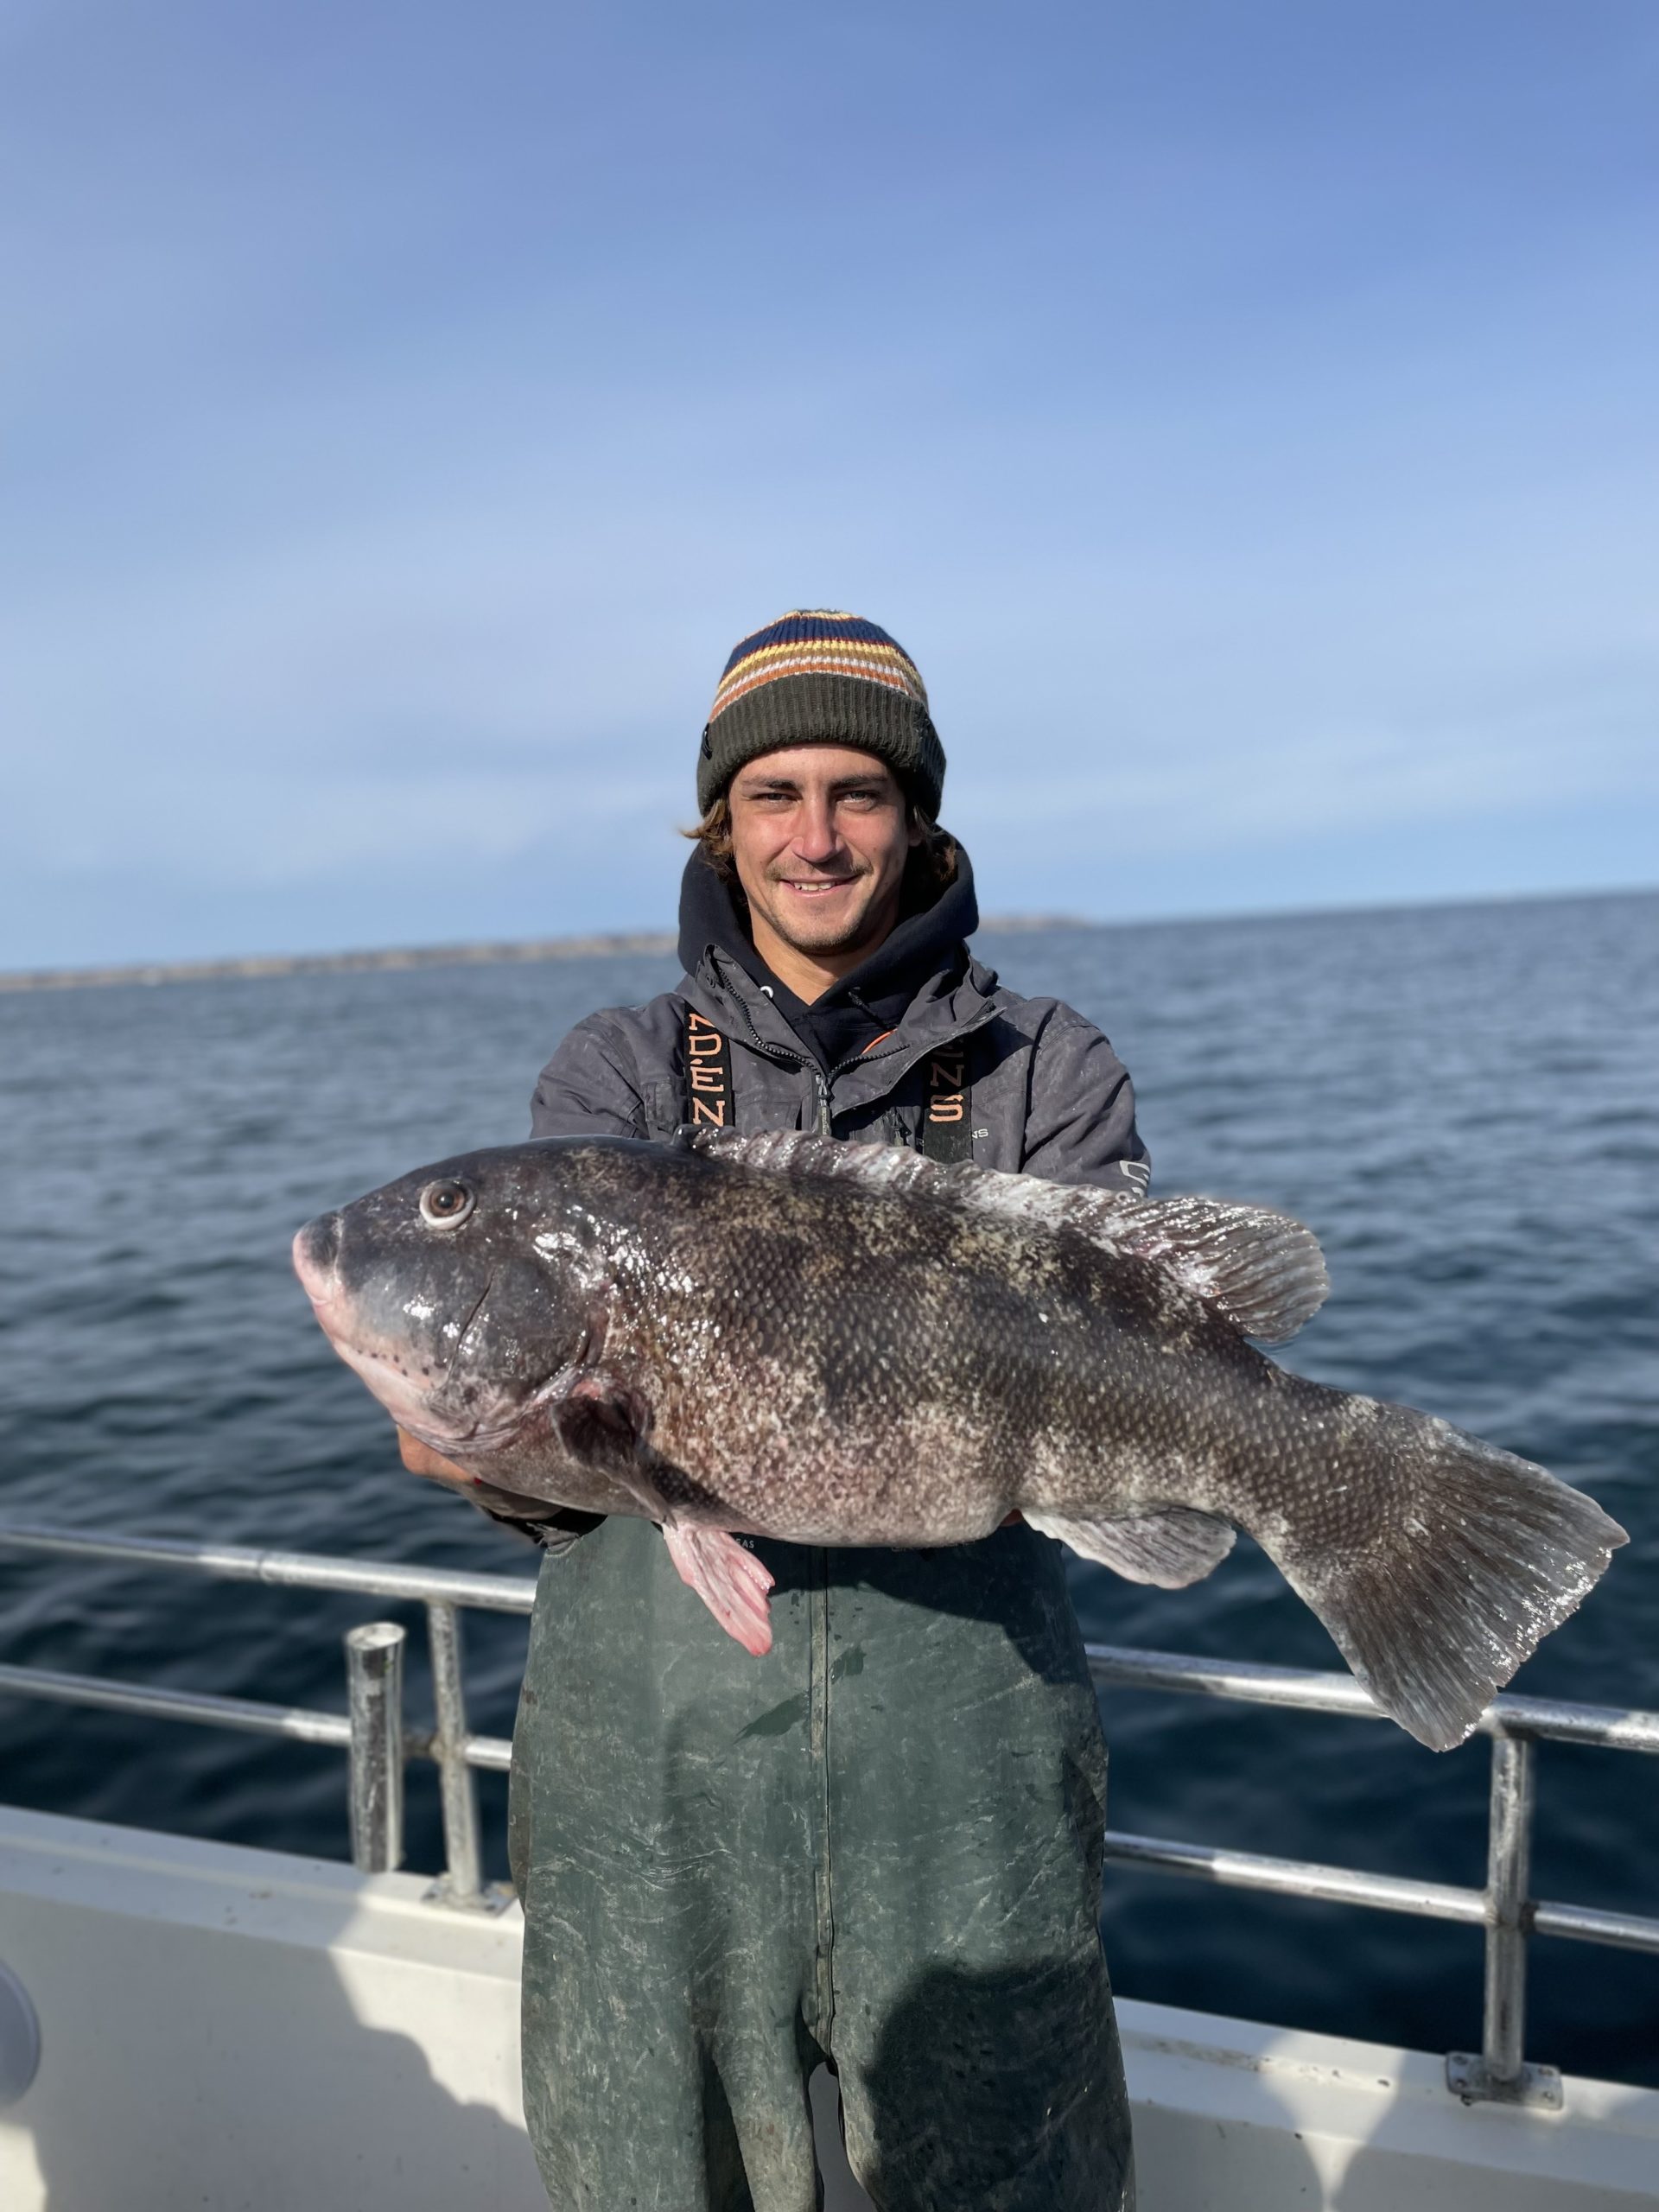 The fall of 2021 was an outstanding one for those hunting big blackfish, or tautog, like this 12 pounder decked by Taylor Maercker aboard the Montauk charter boat Double D in November.